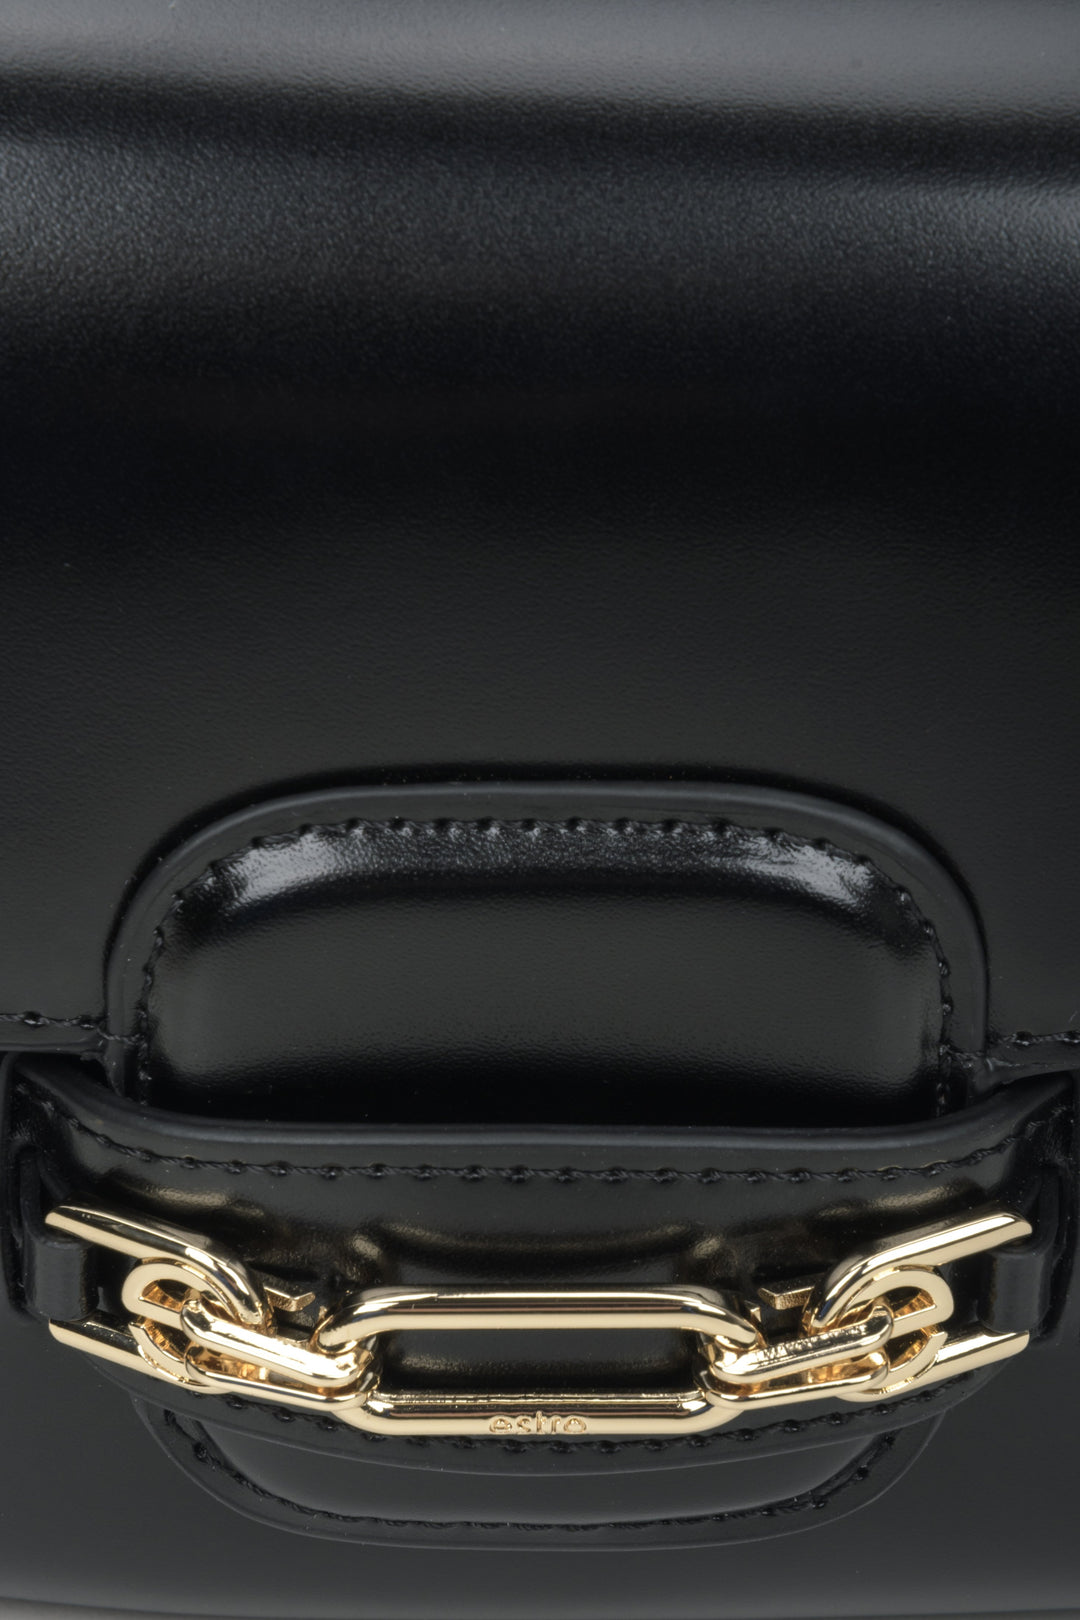 Women's black leather bag - close-up on the detail.